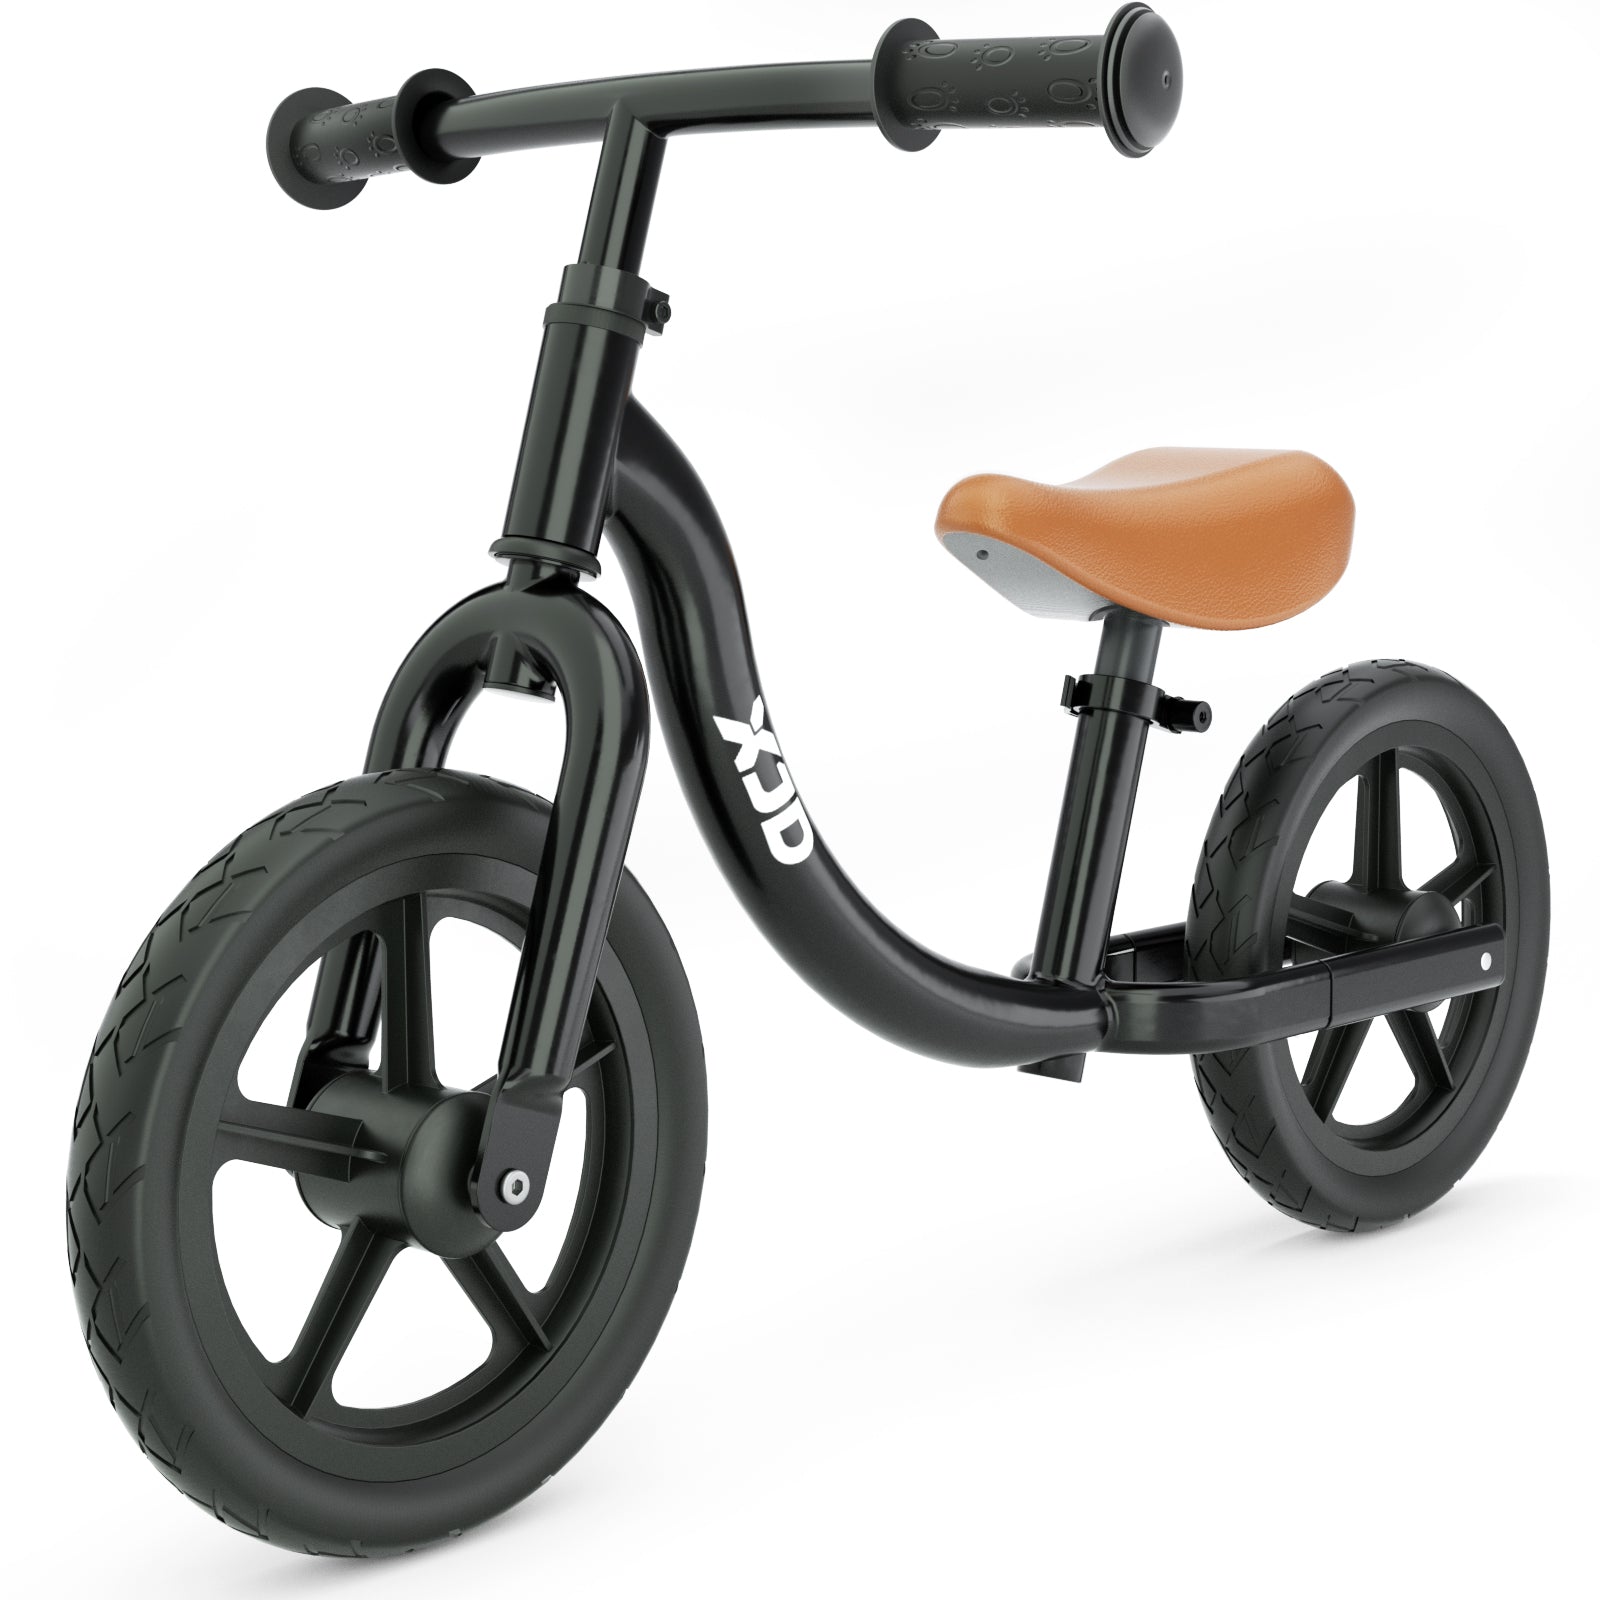 XJD Toddler Balance Bike No Pedal Bicycle for Girls Boys Ages 18 Months to 5 Years Old Black